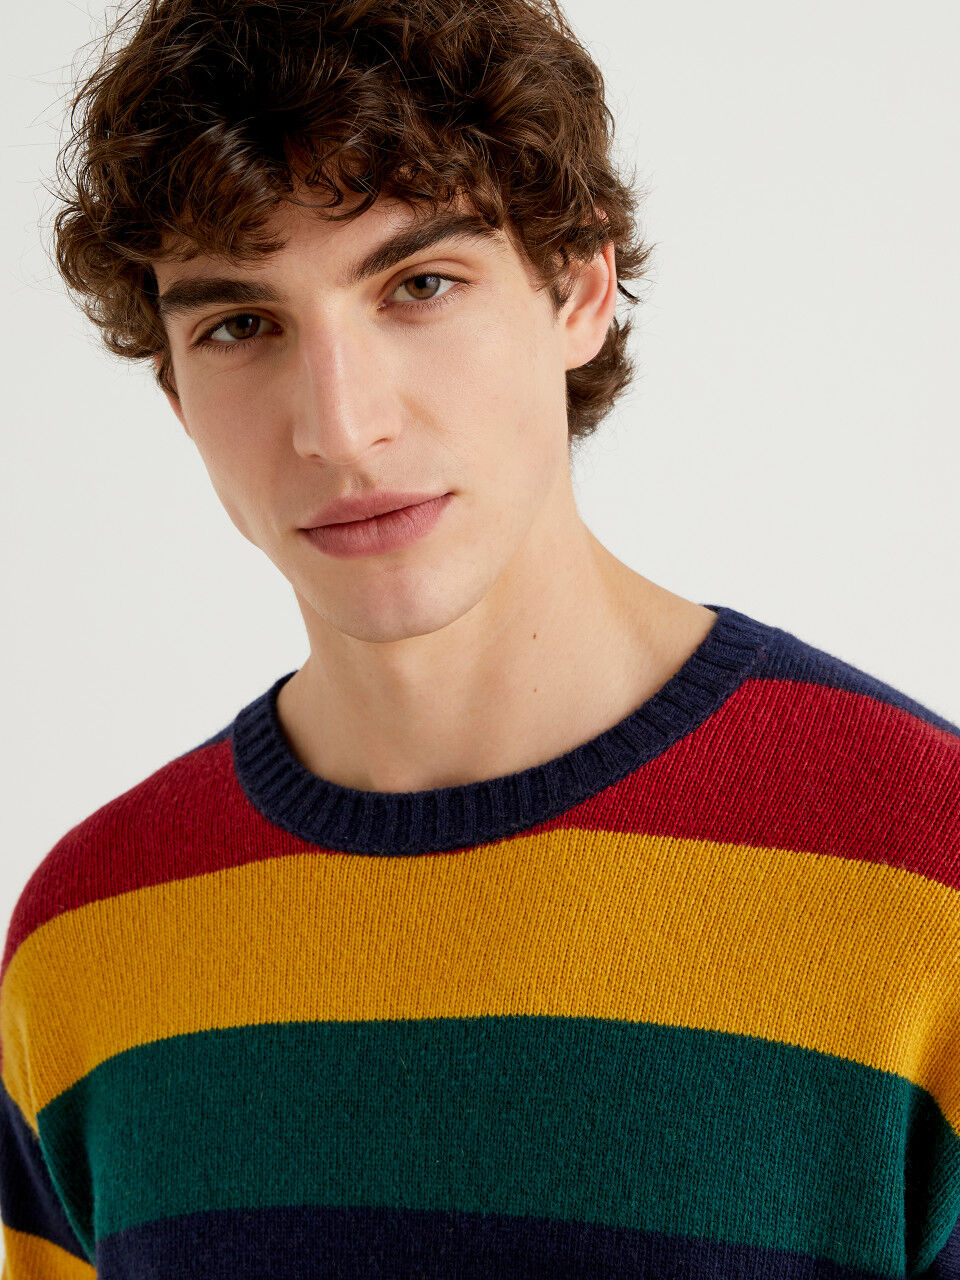 Men's Crew Neck Sweaters and Jumpers | Benetton